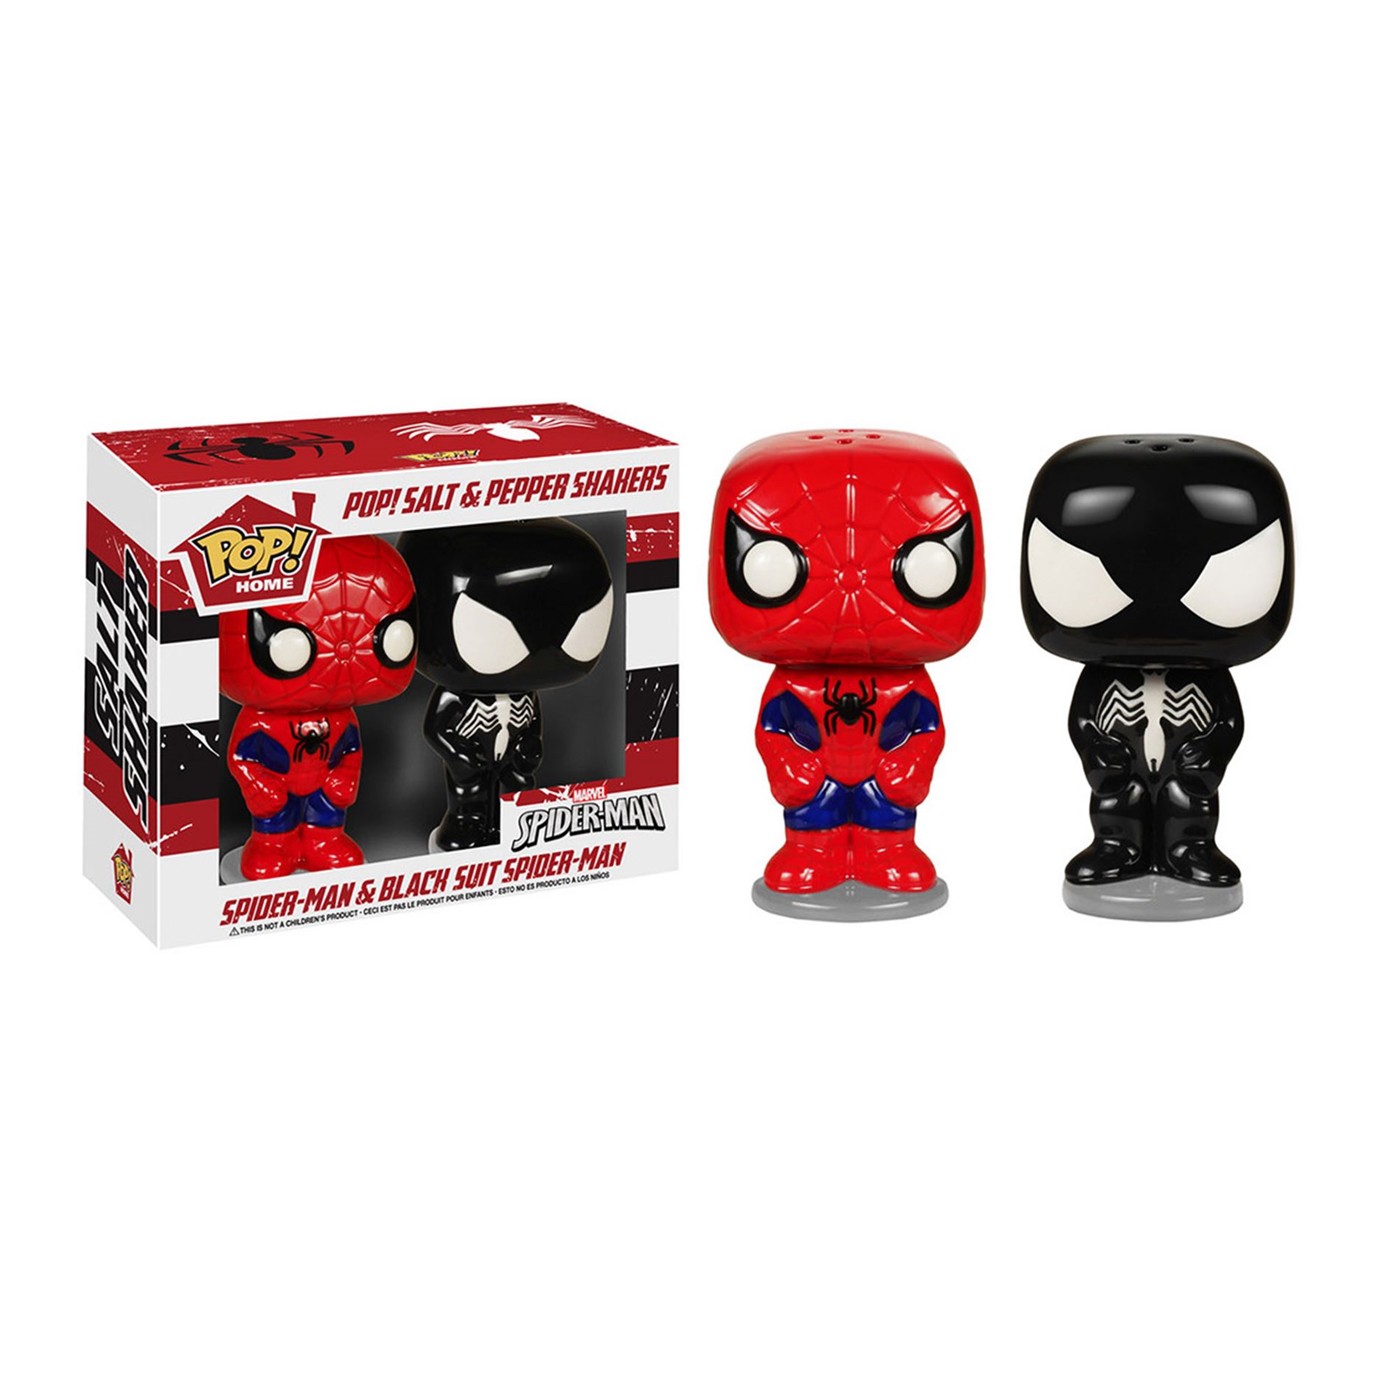 Spiderman and Venom POP Salt and Pepper Shakers